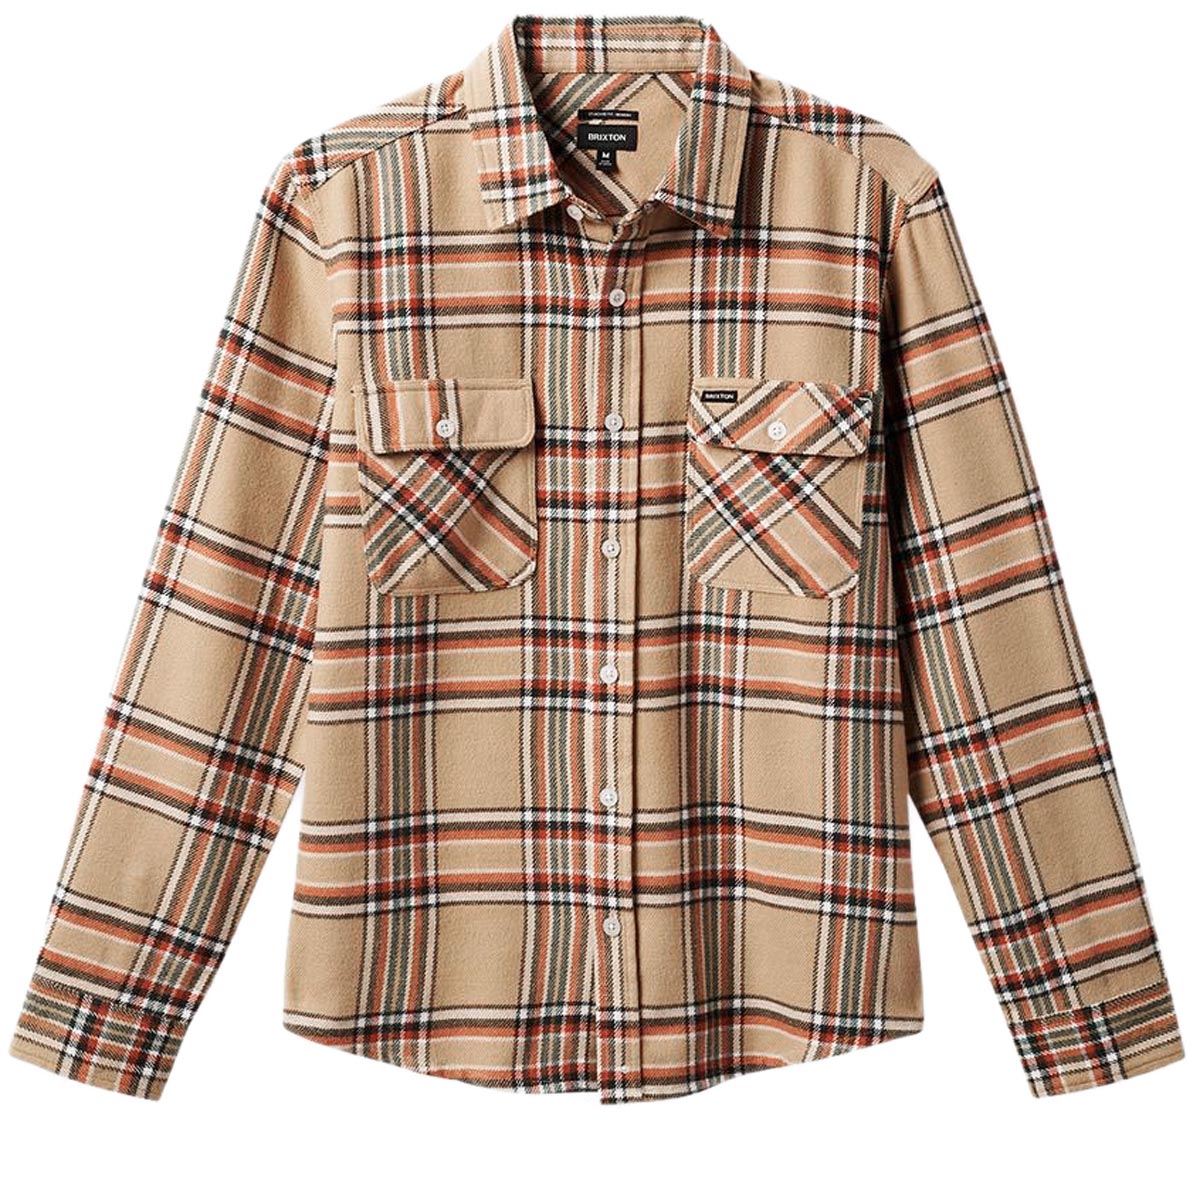 Brixton Bowery Flannel Long Sleeve Shirt - Sand/Off White/Terracotta image 3